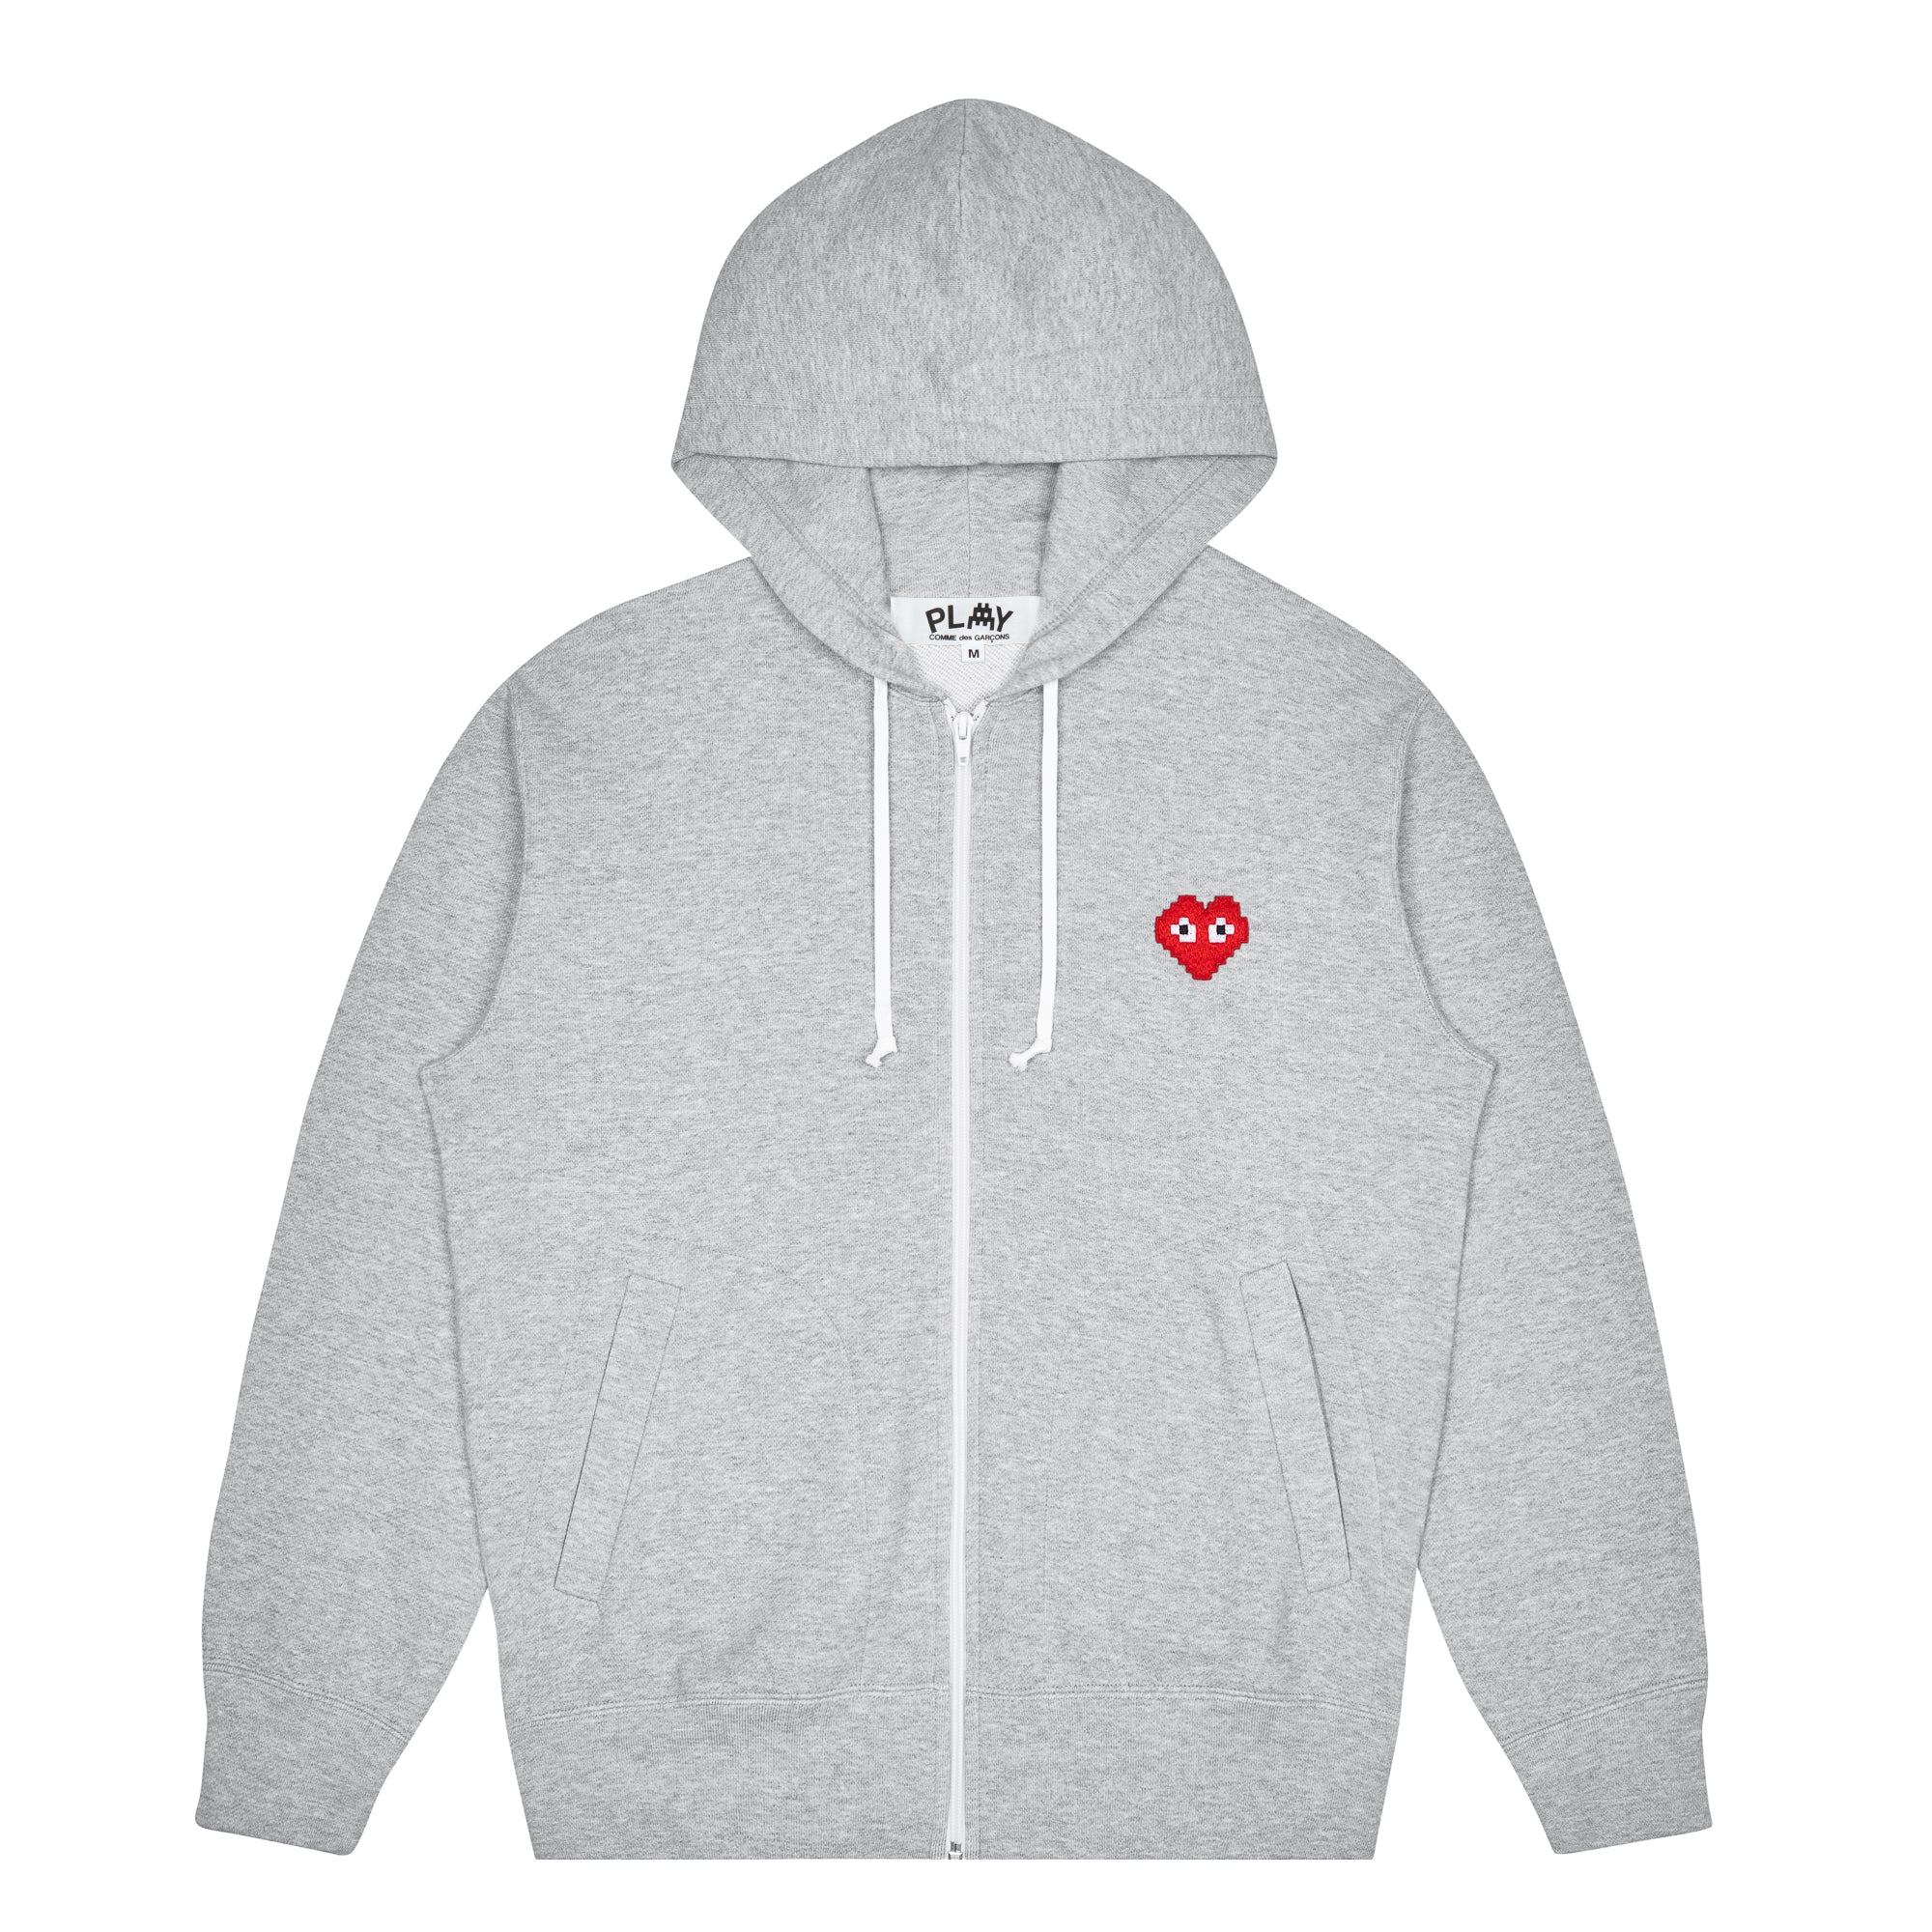 PLAY - the Artist Invader Hooded Sweatshirt - (T325)(T326)(Grey) view 1